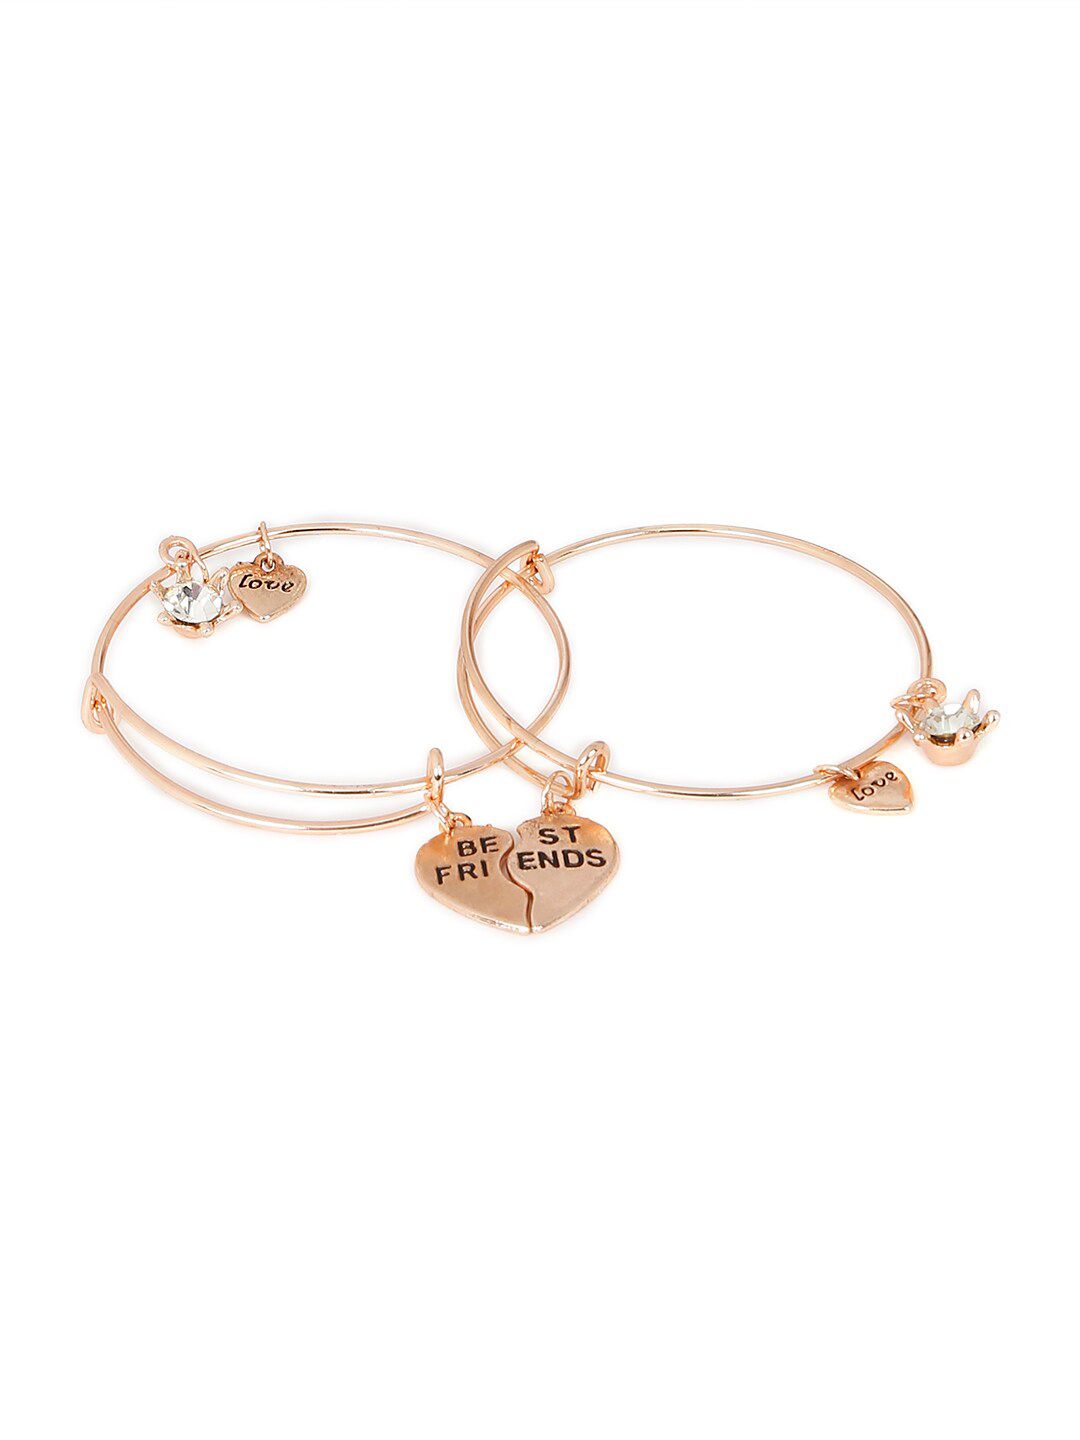 Mahi Women Set Of 2 Rose Gold-Plated Best Friends Bracelet Price in India